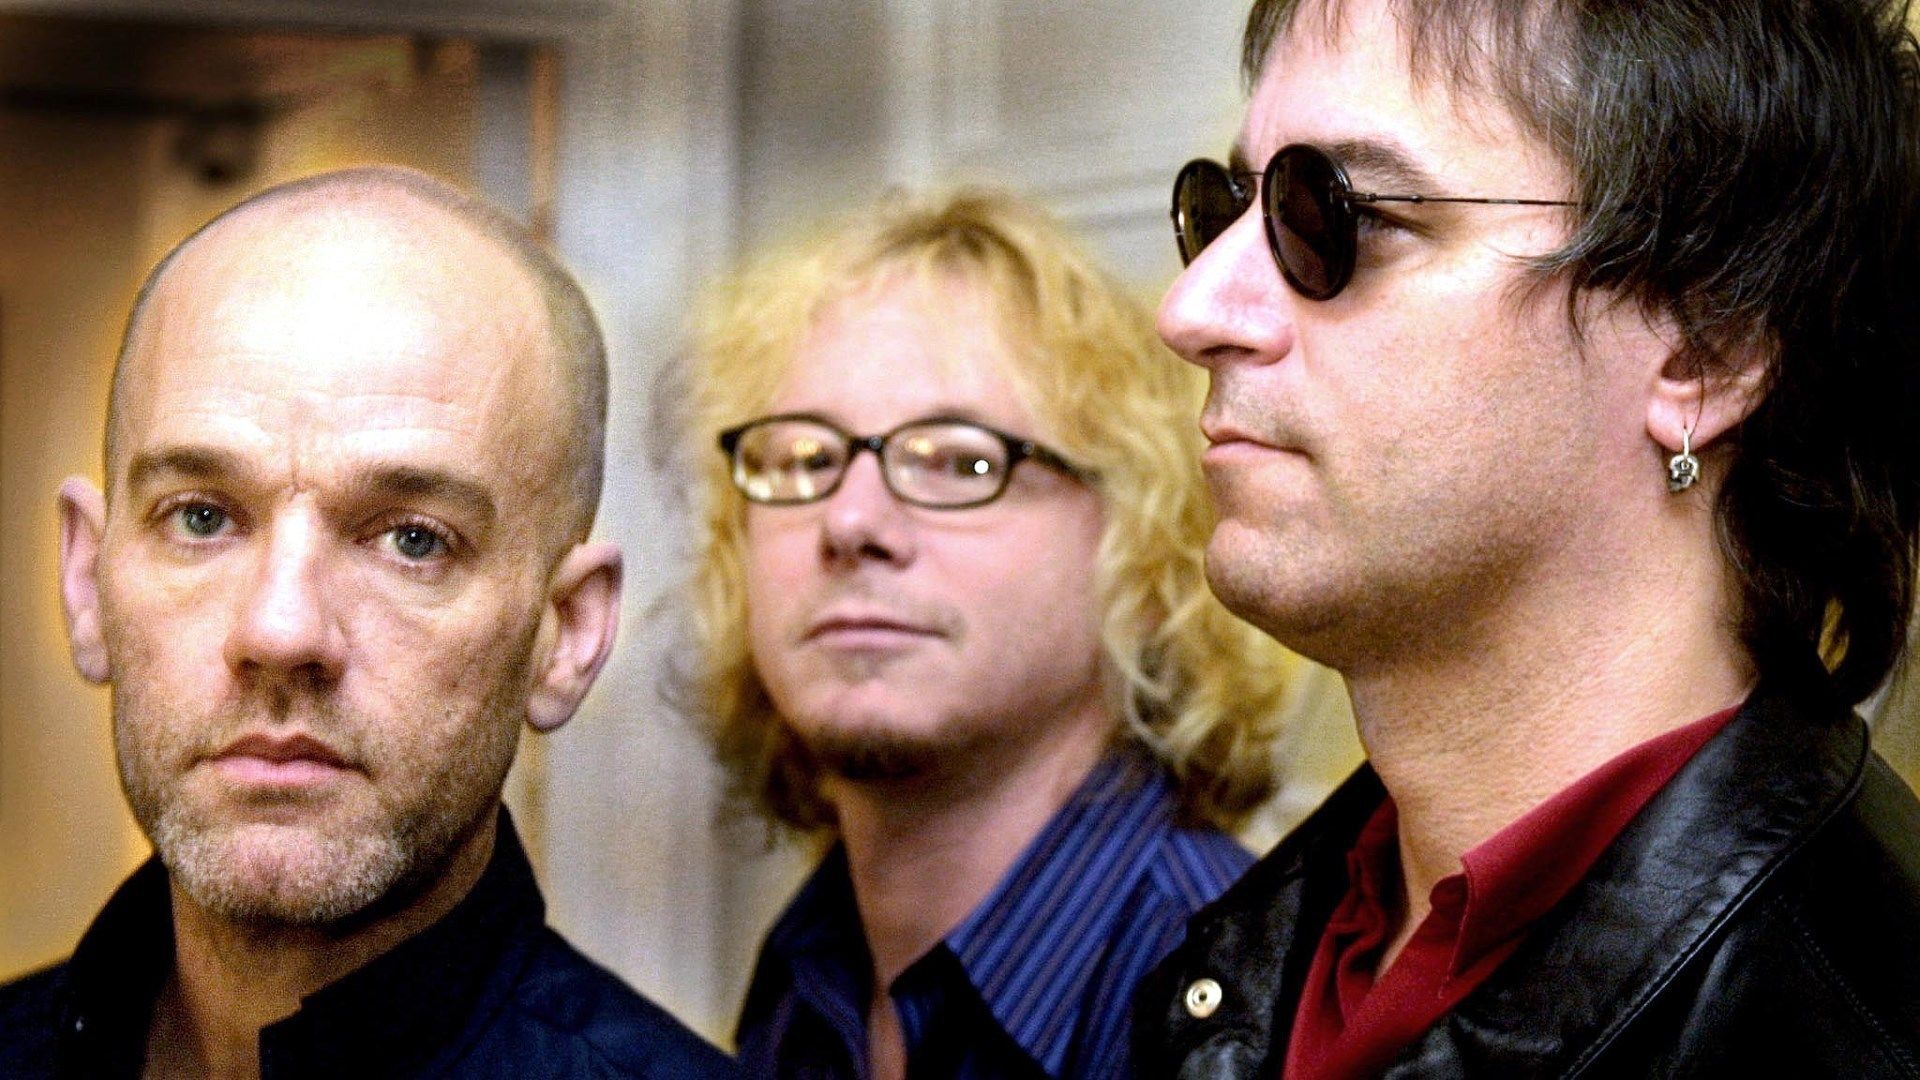 R.E.M.: In View 1988-2003 (The Best of R.E.M.) Backdrop